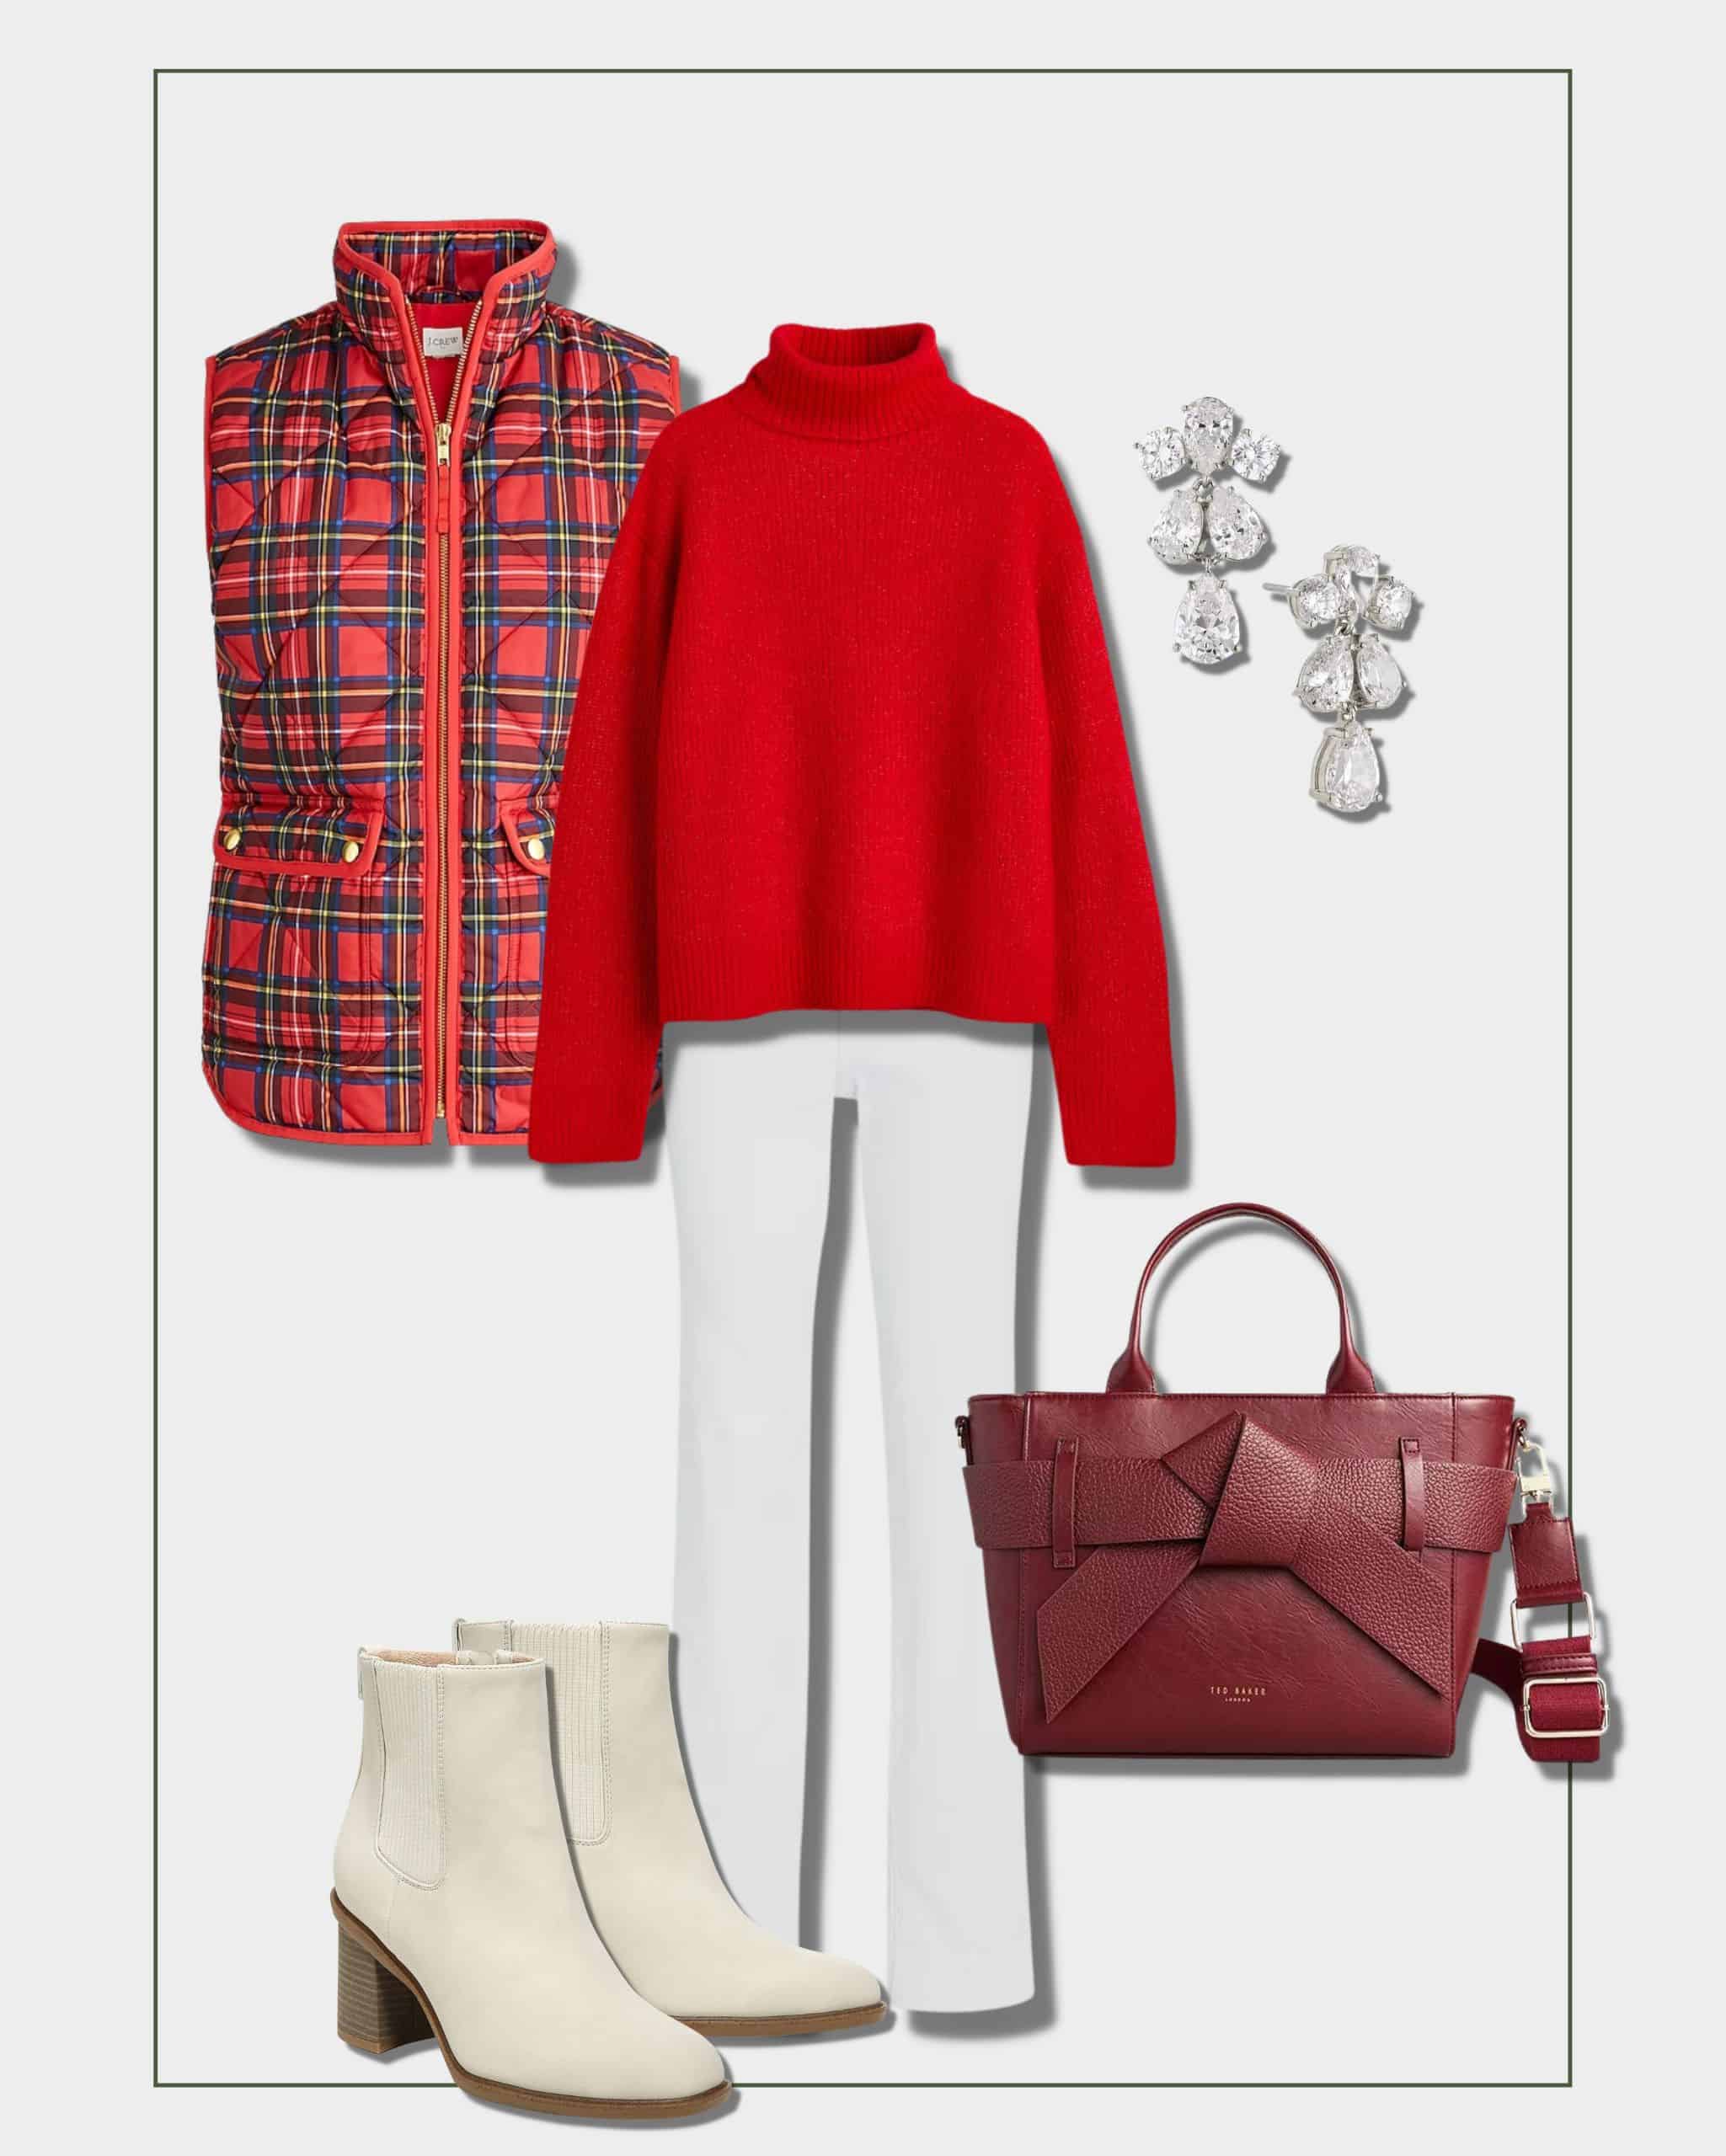 Christmas outfit with red oversized sweater, white jeans, white ankle boots and red plaid vest